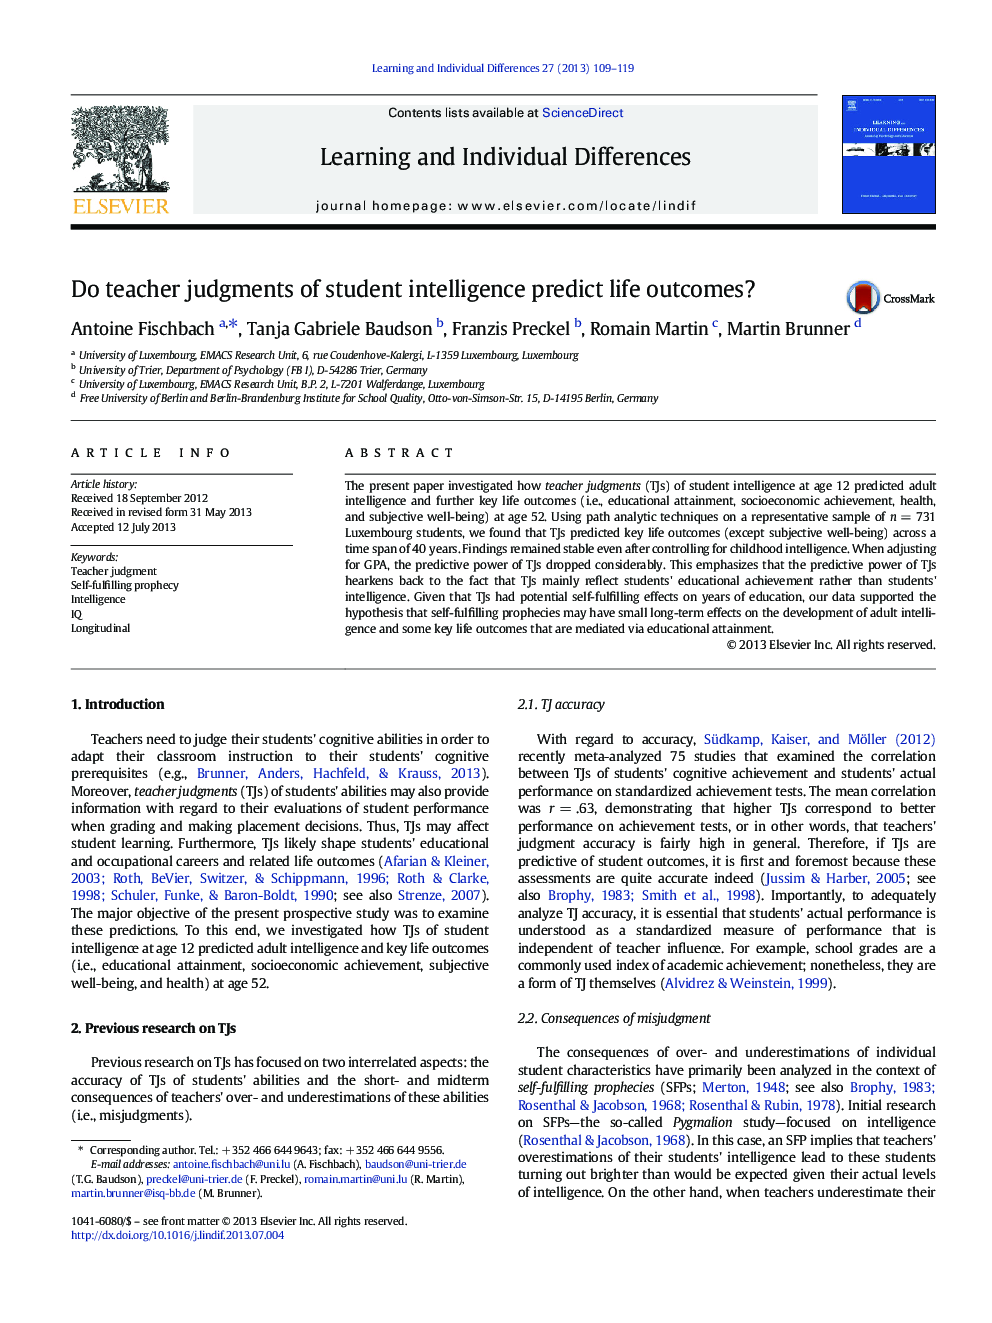 Do teacher judgments of student intelligence predict life outcomes?